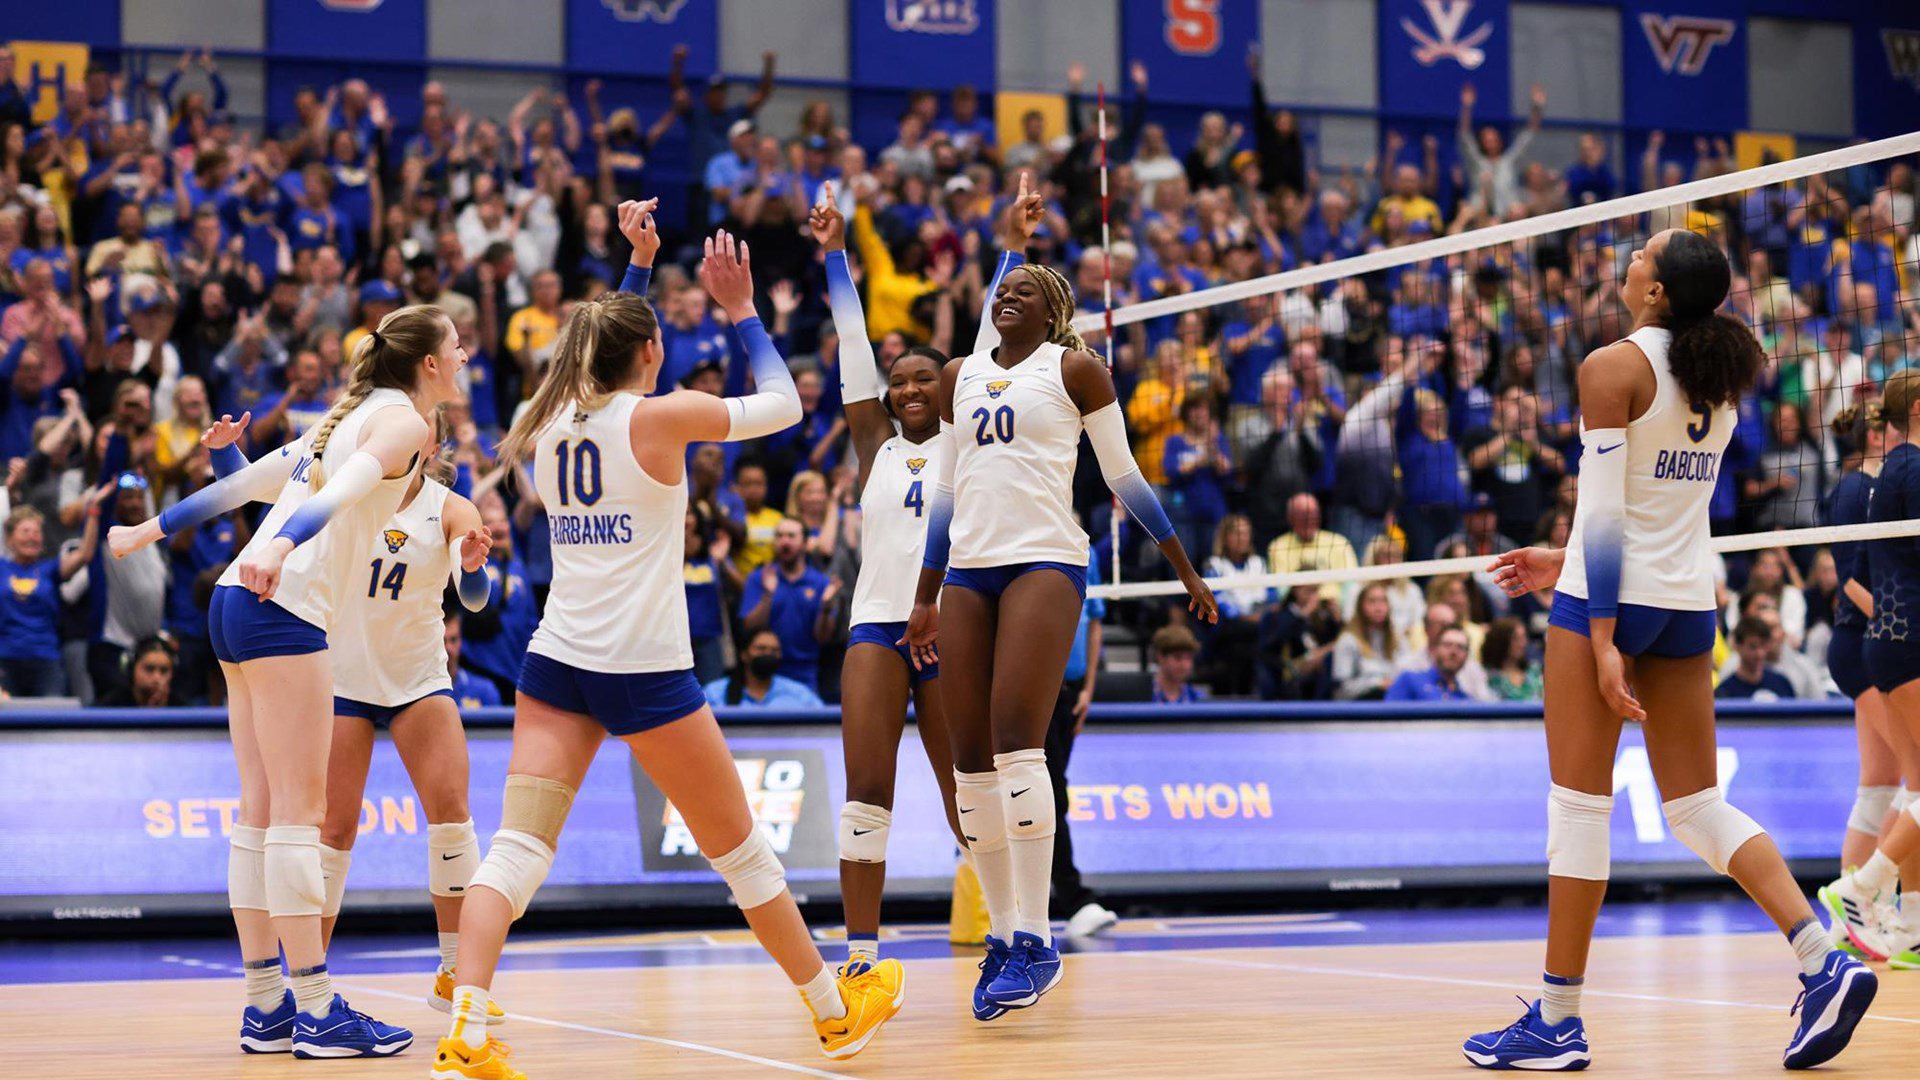 Ncaa Womens Volleyball Semifinal Preview Live With Michella Chester And Emily Ehman Vcp